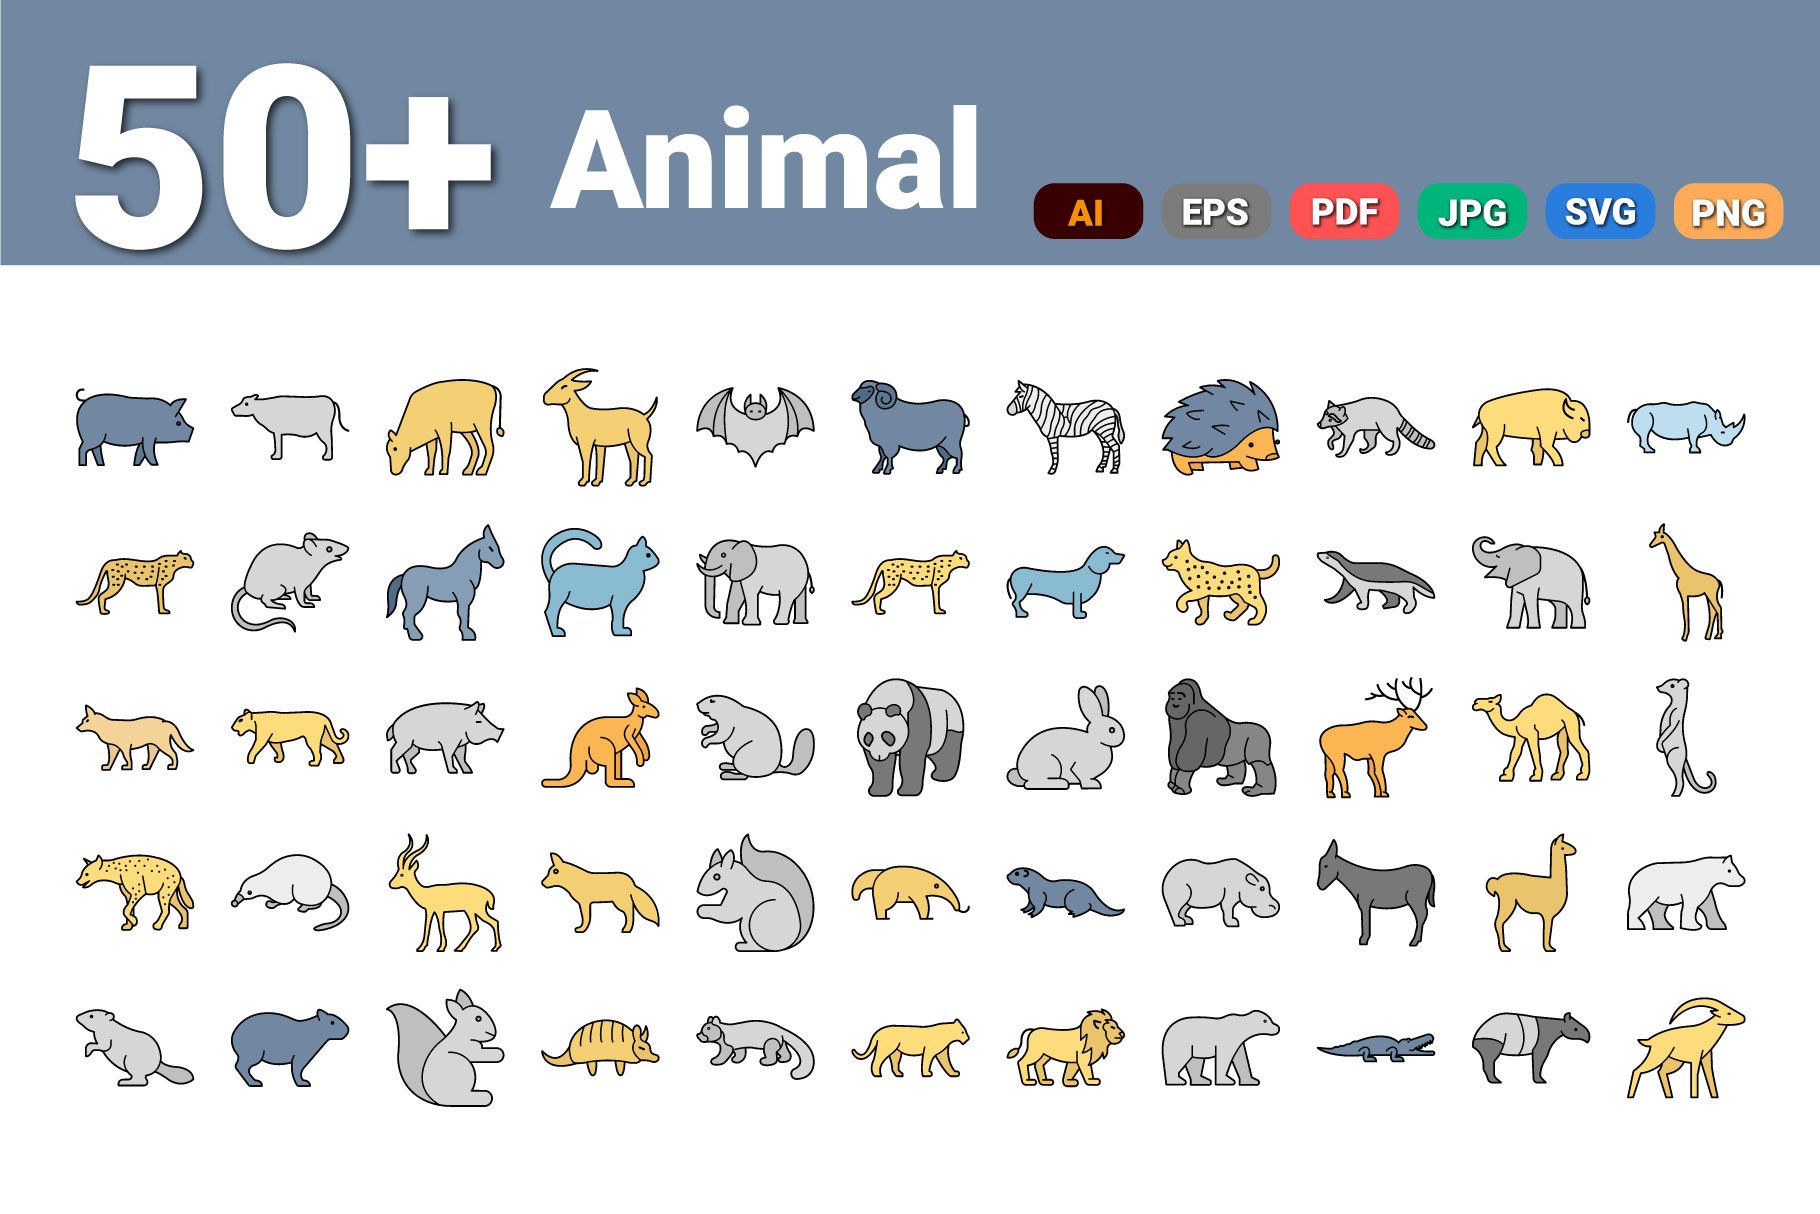 Animal Icons cover image.